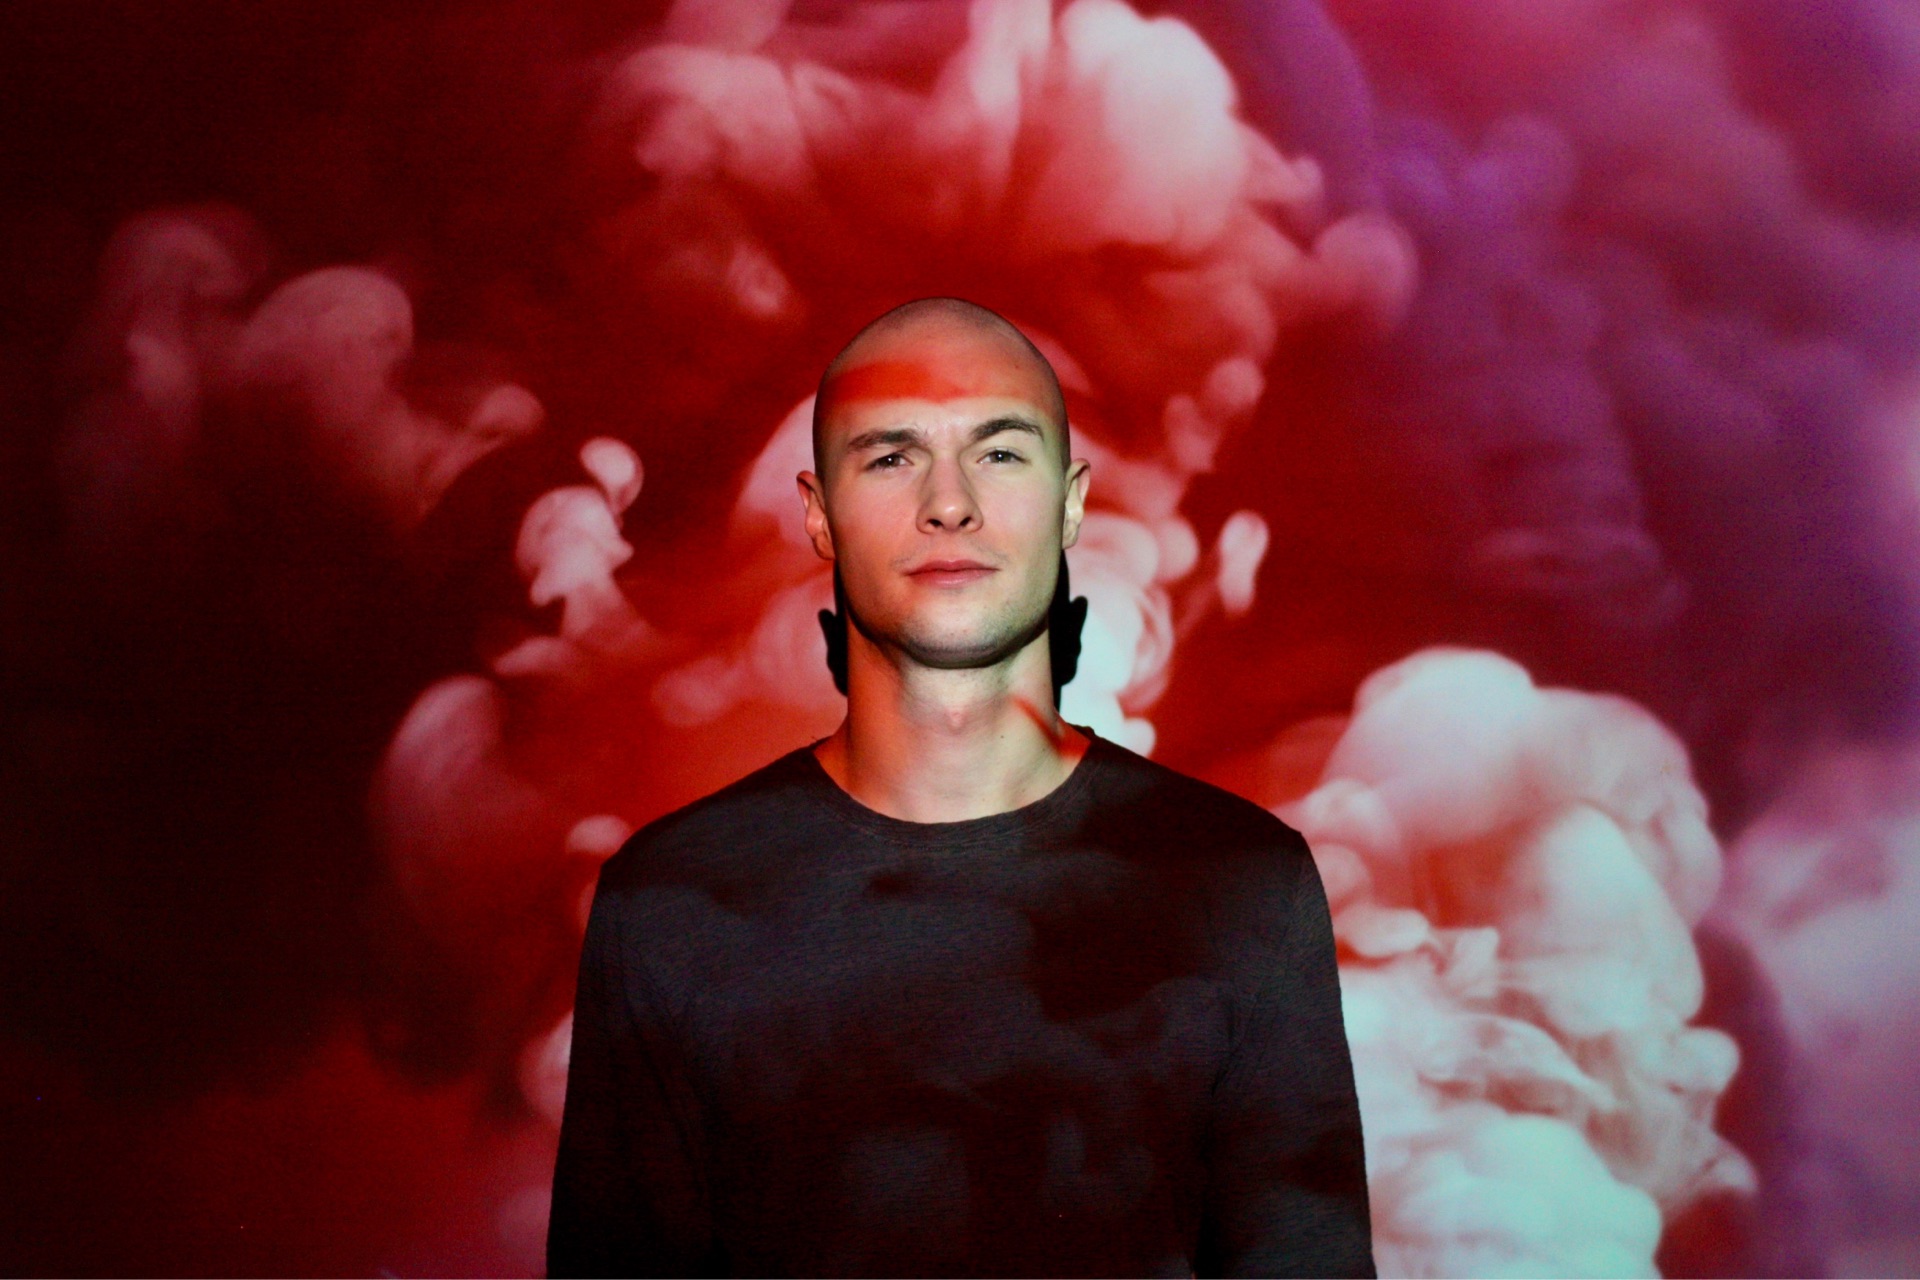 A man standing in front of a vibrant red & purple smoke cloud.